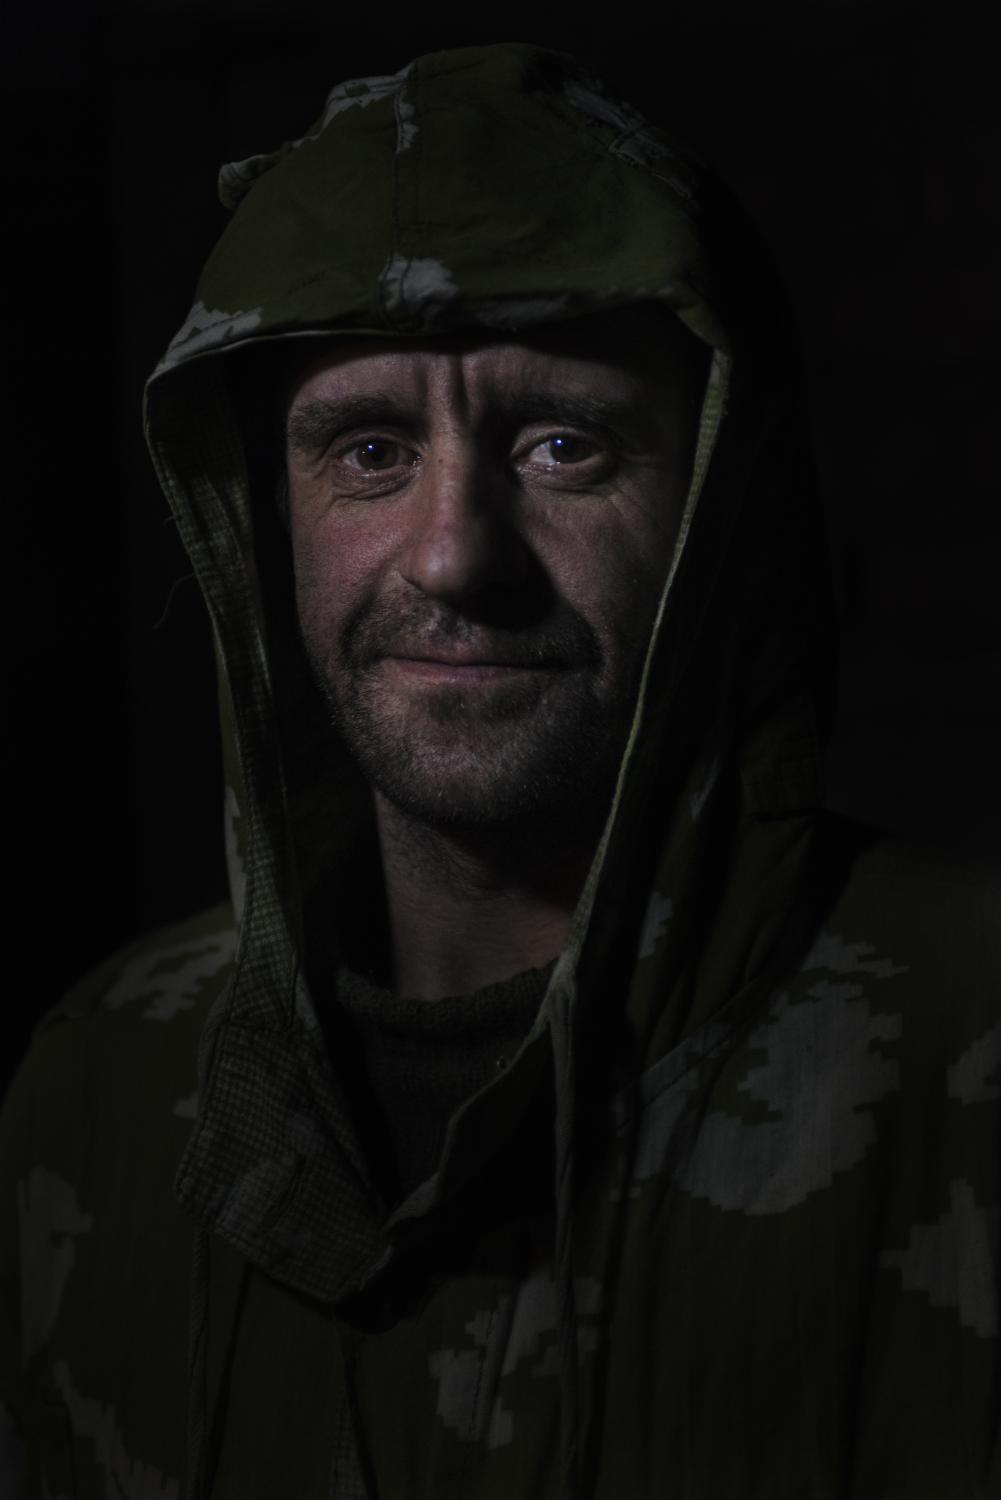 Under fire  - portraits on the front line of the war in Ukraine